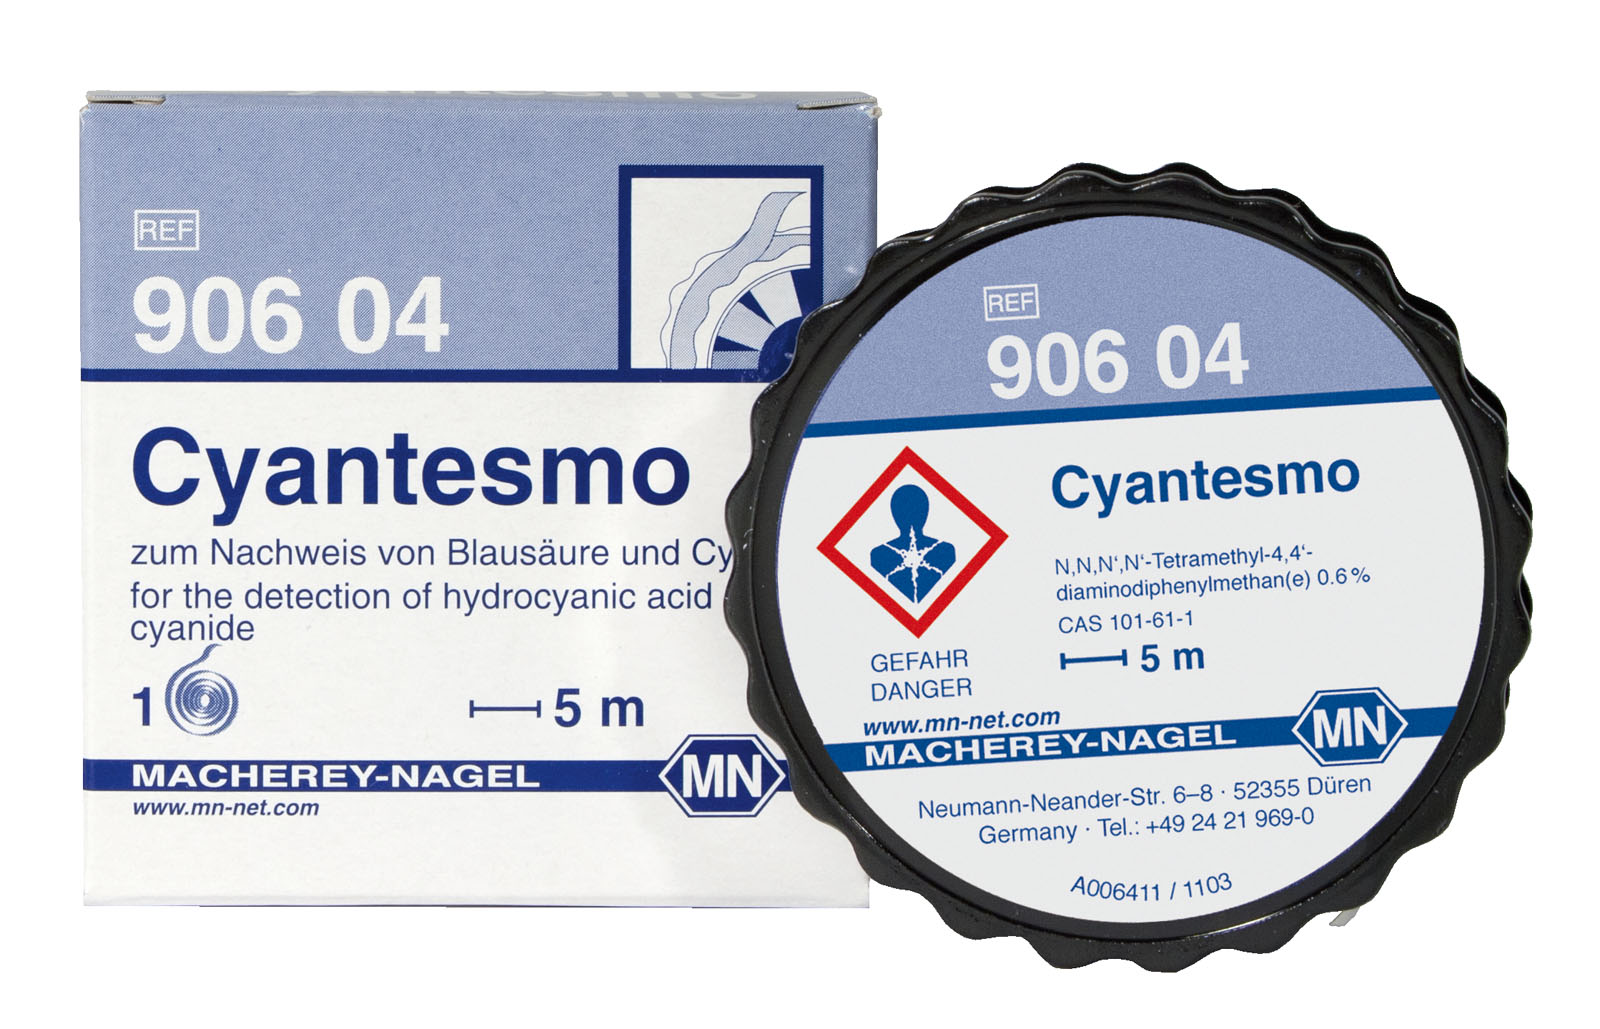 Cyantesmo Test Paper